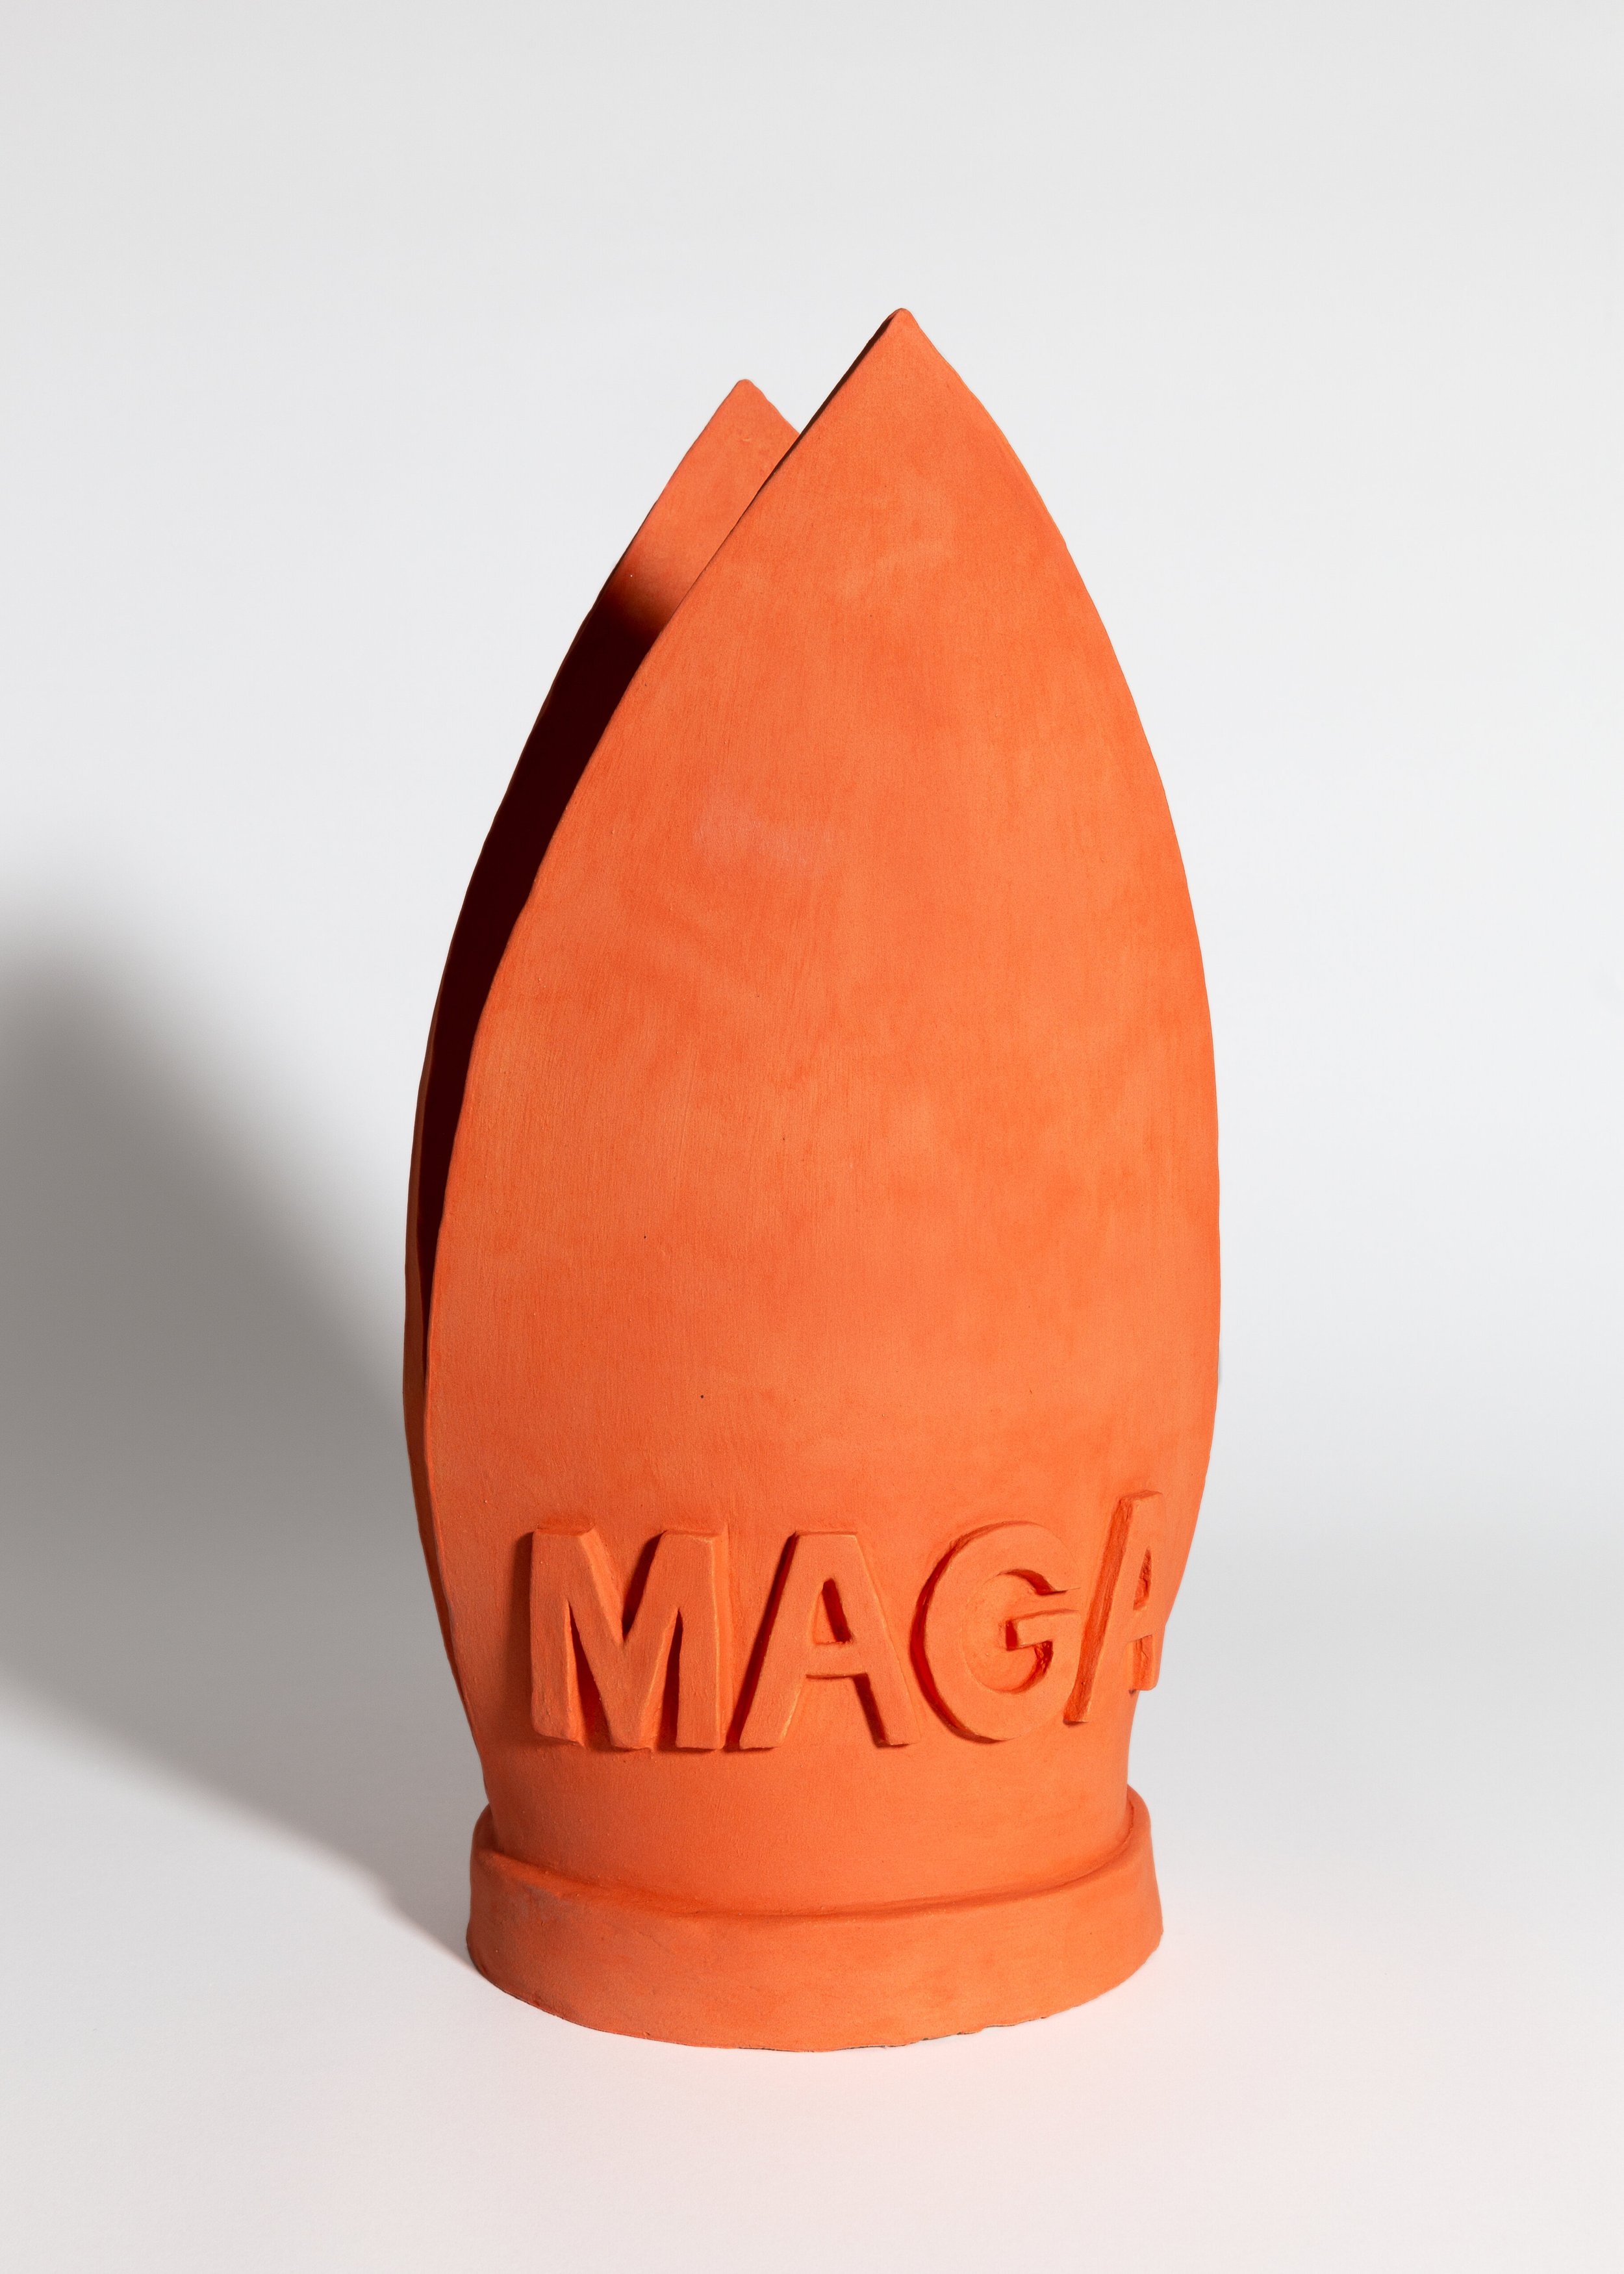   Richard Ibghy &amp; Marilou Lemmens,   Pope for Trump , 2021. Ceramic, 16 x 12 x 12 in. 